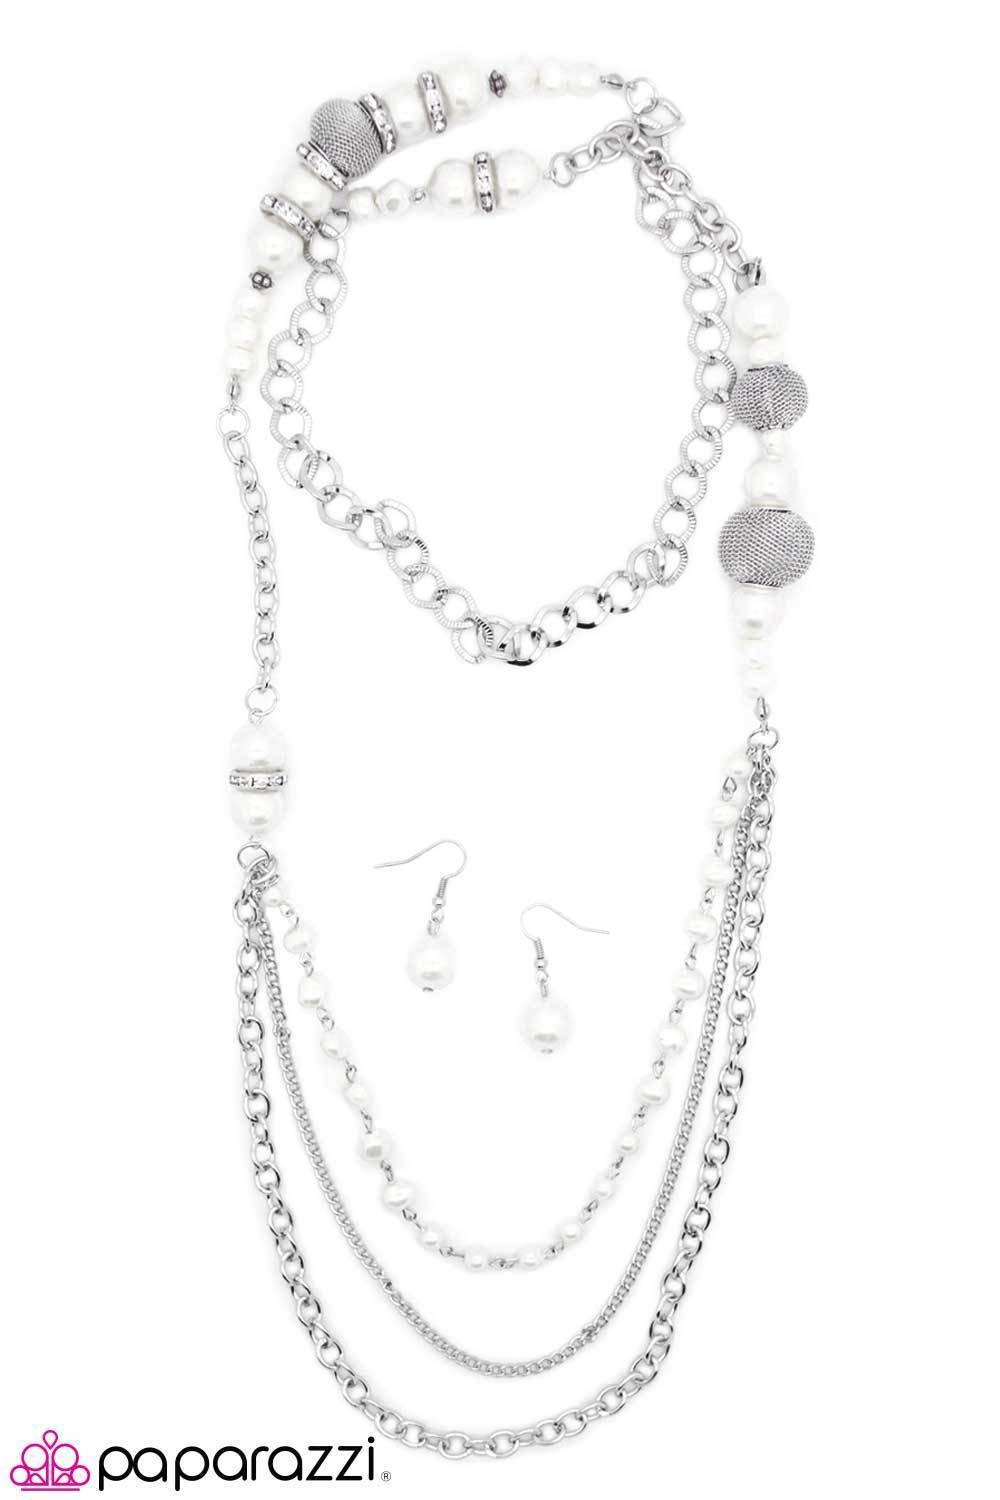 Enmeshed in Elegance Long White and Silver Necklace and matching Earrings - Paparazzi Accessories - lightbox -CarasShop.com - $5 Jewelry by Cara Jewels